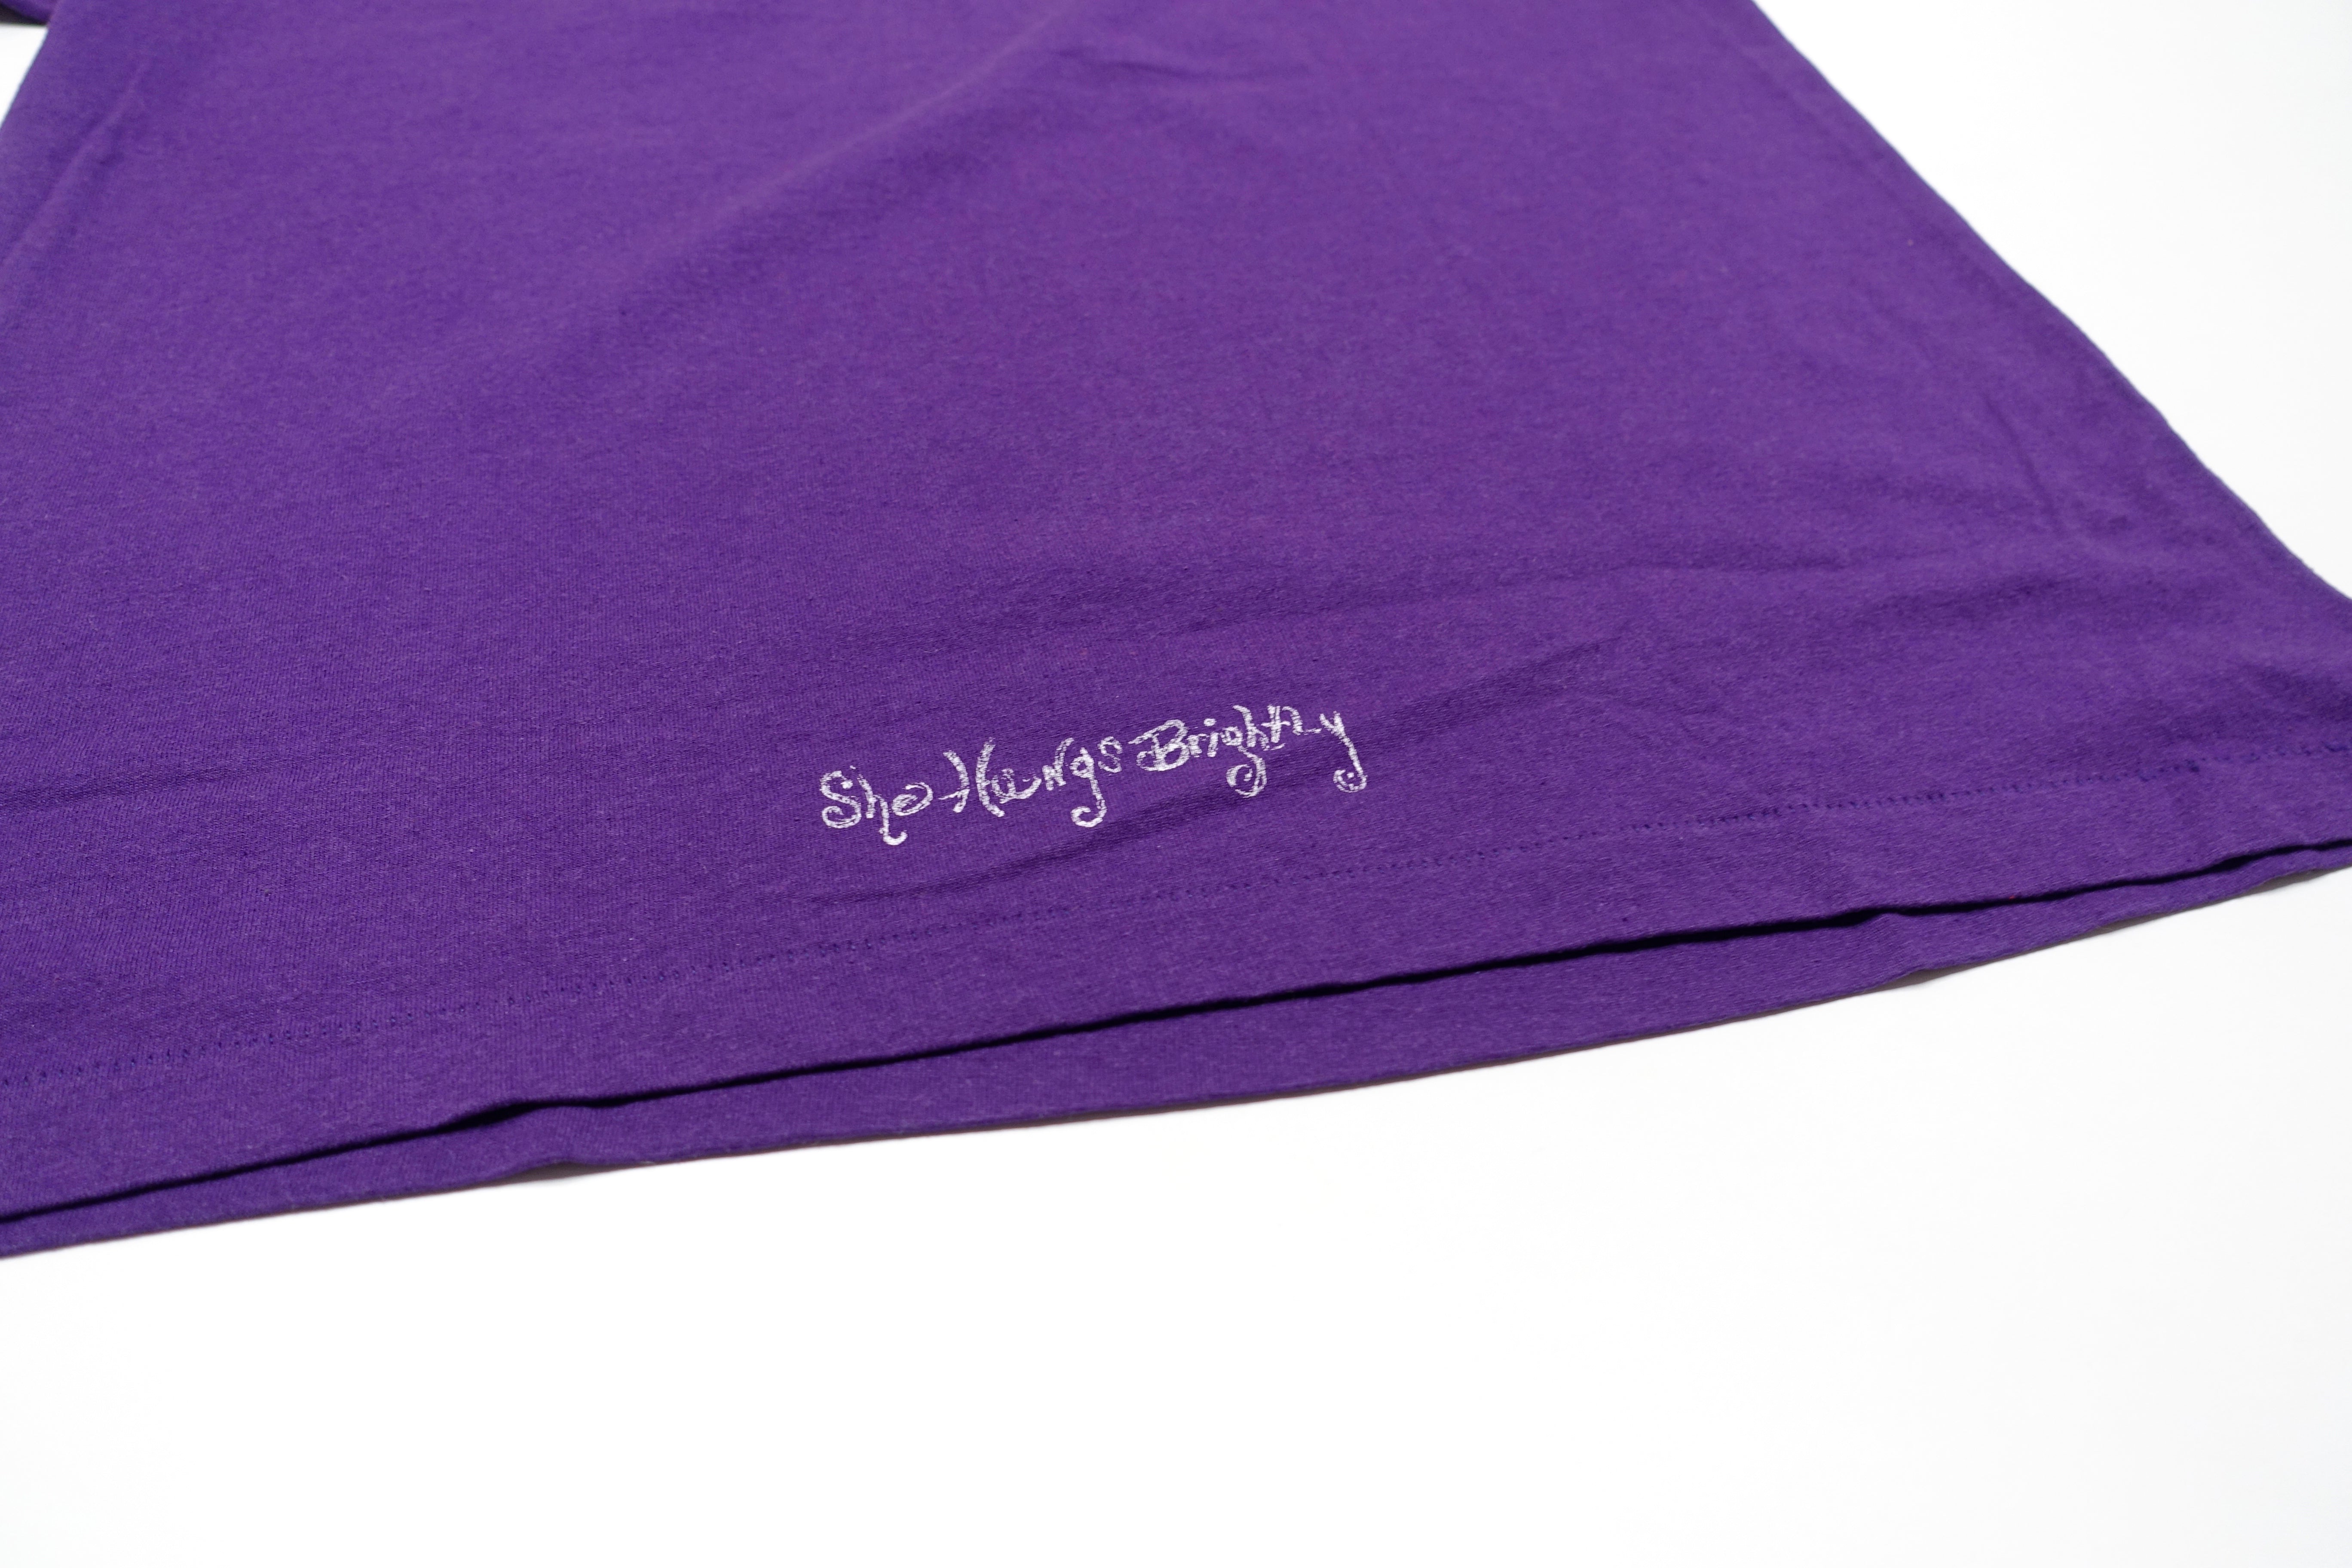 Mazzy Star ‎– She Hangs Brightly 90's Tour Shirt Size XL